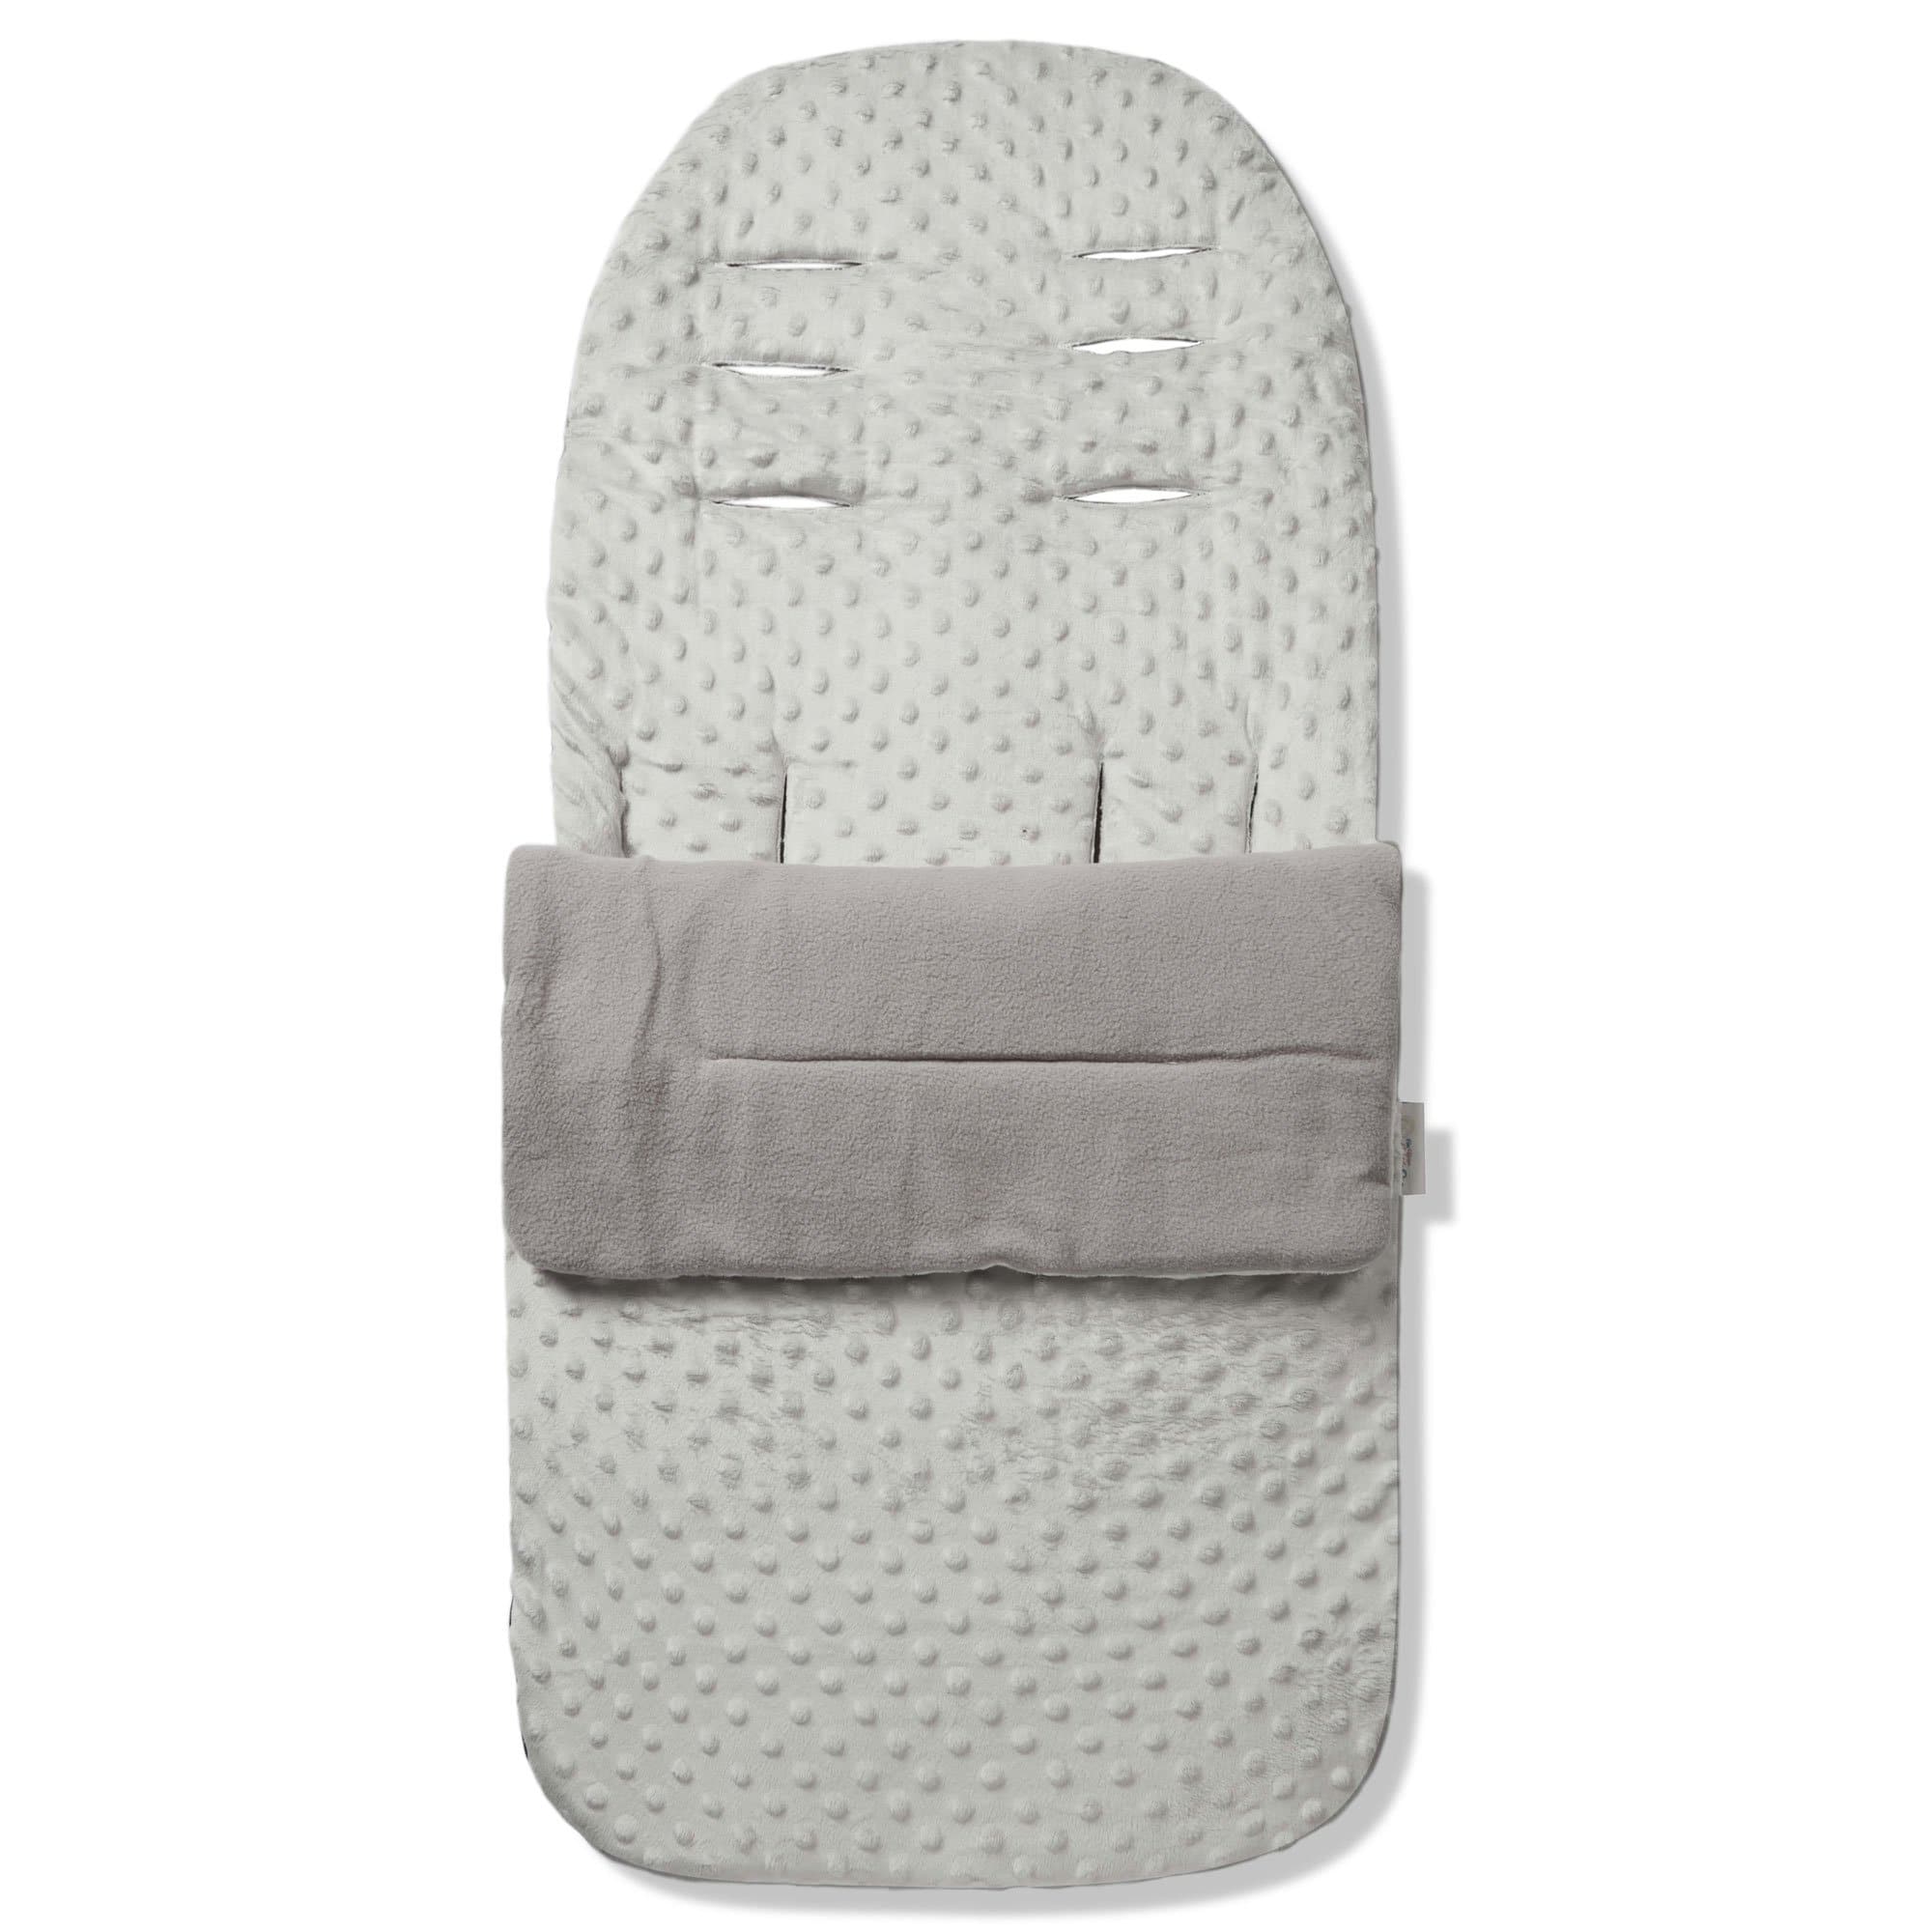 Dimple Footmuff / Cosy Toes Compatible with BabySun - Grey / Fits All Models | For Your Little One